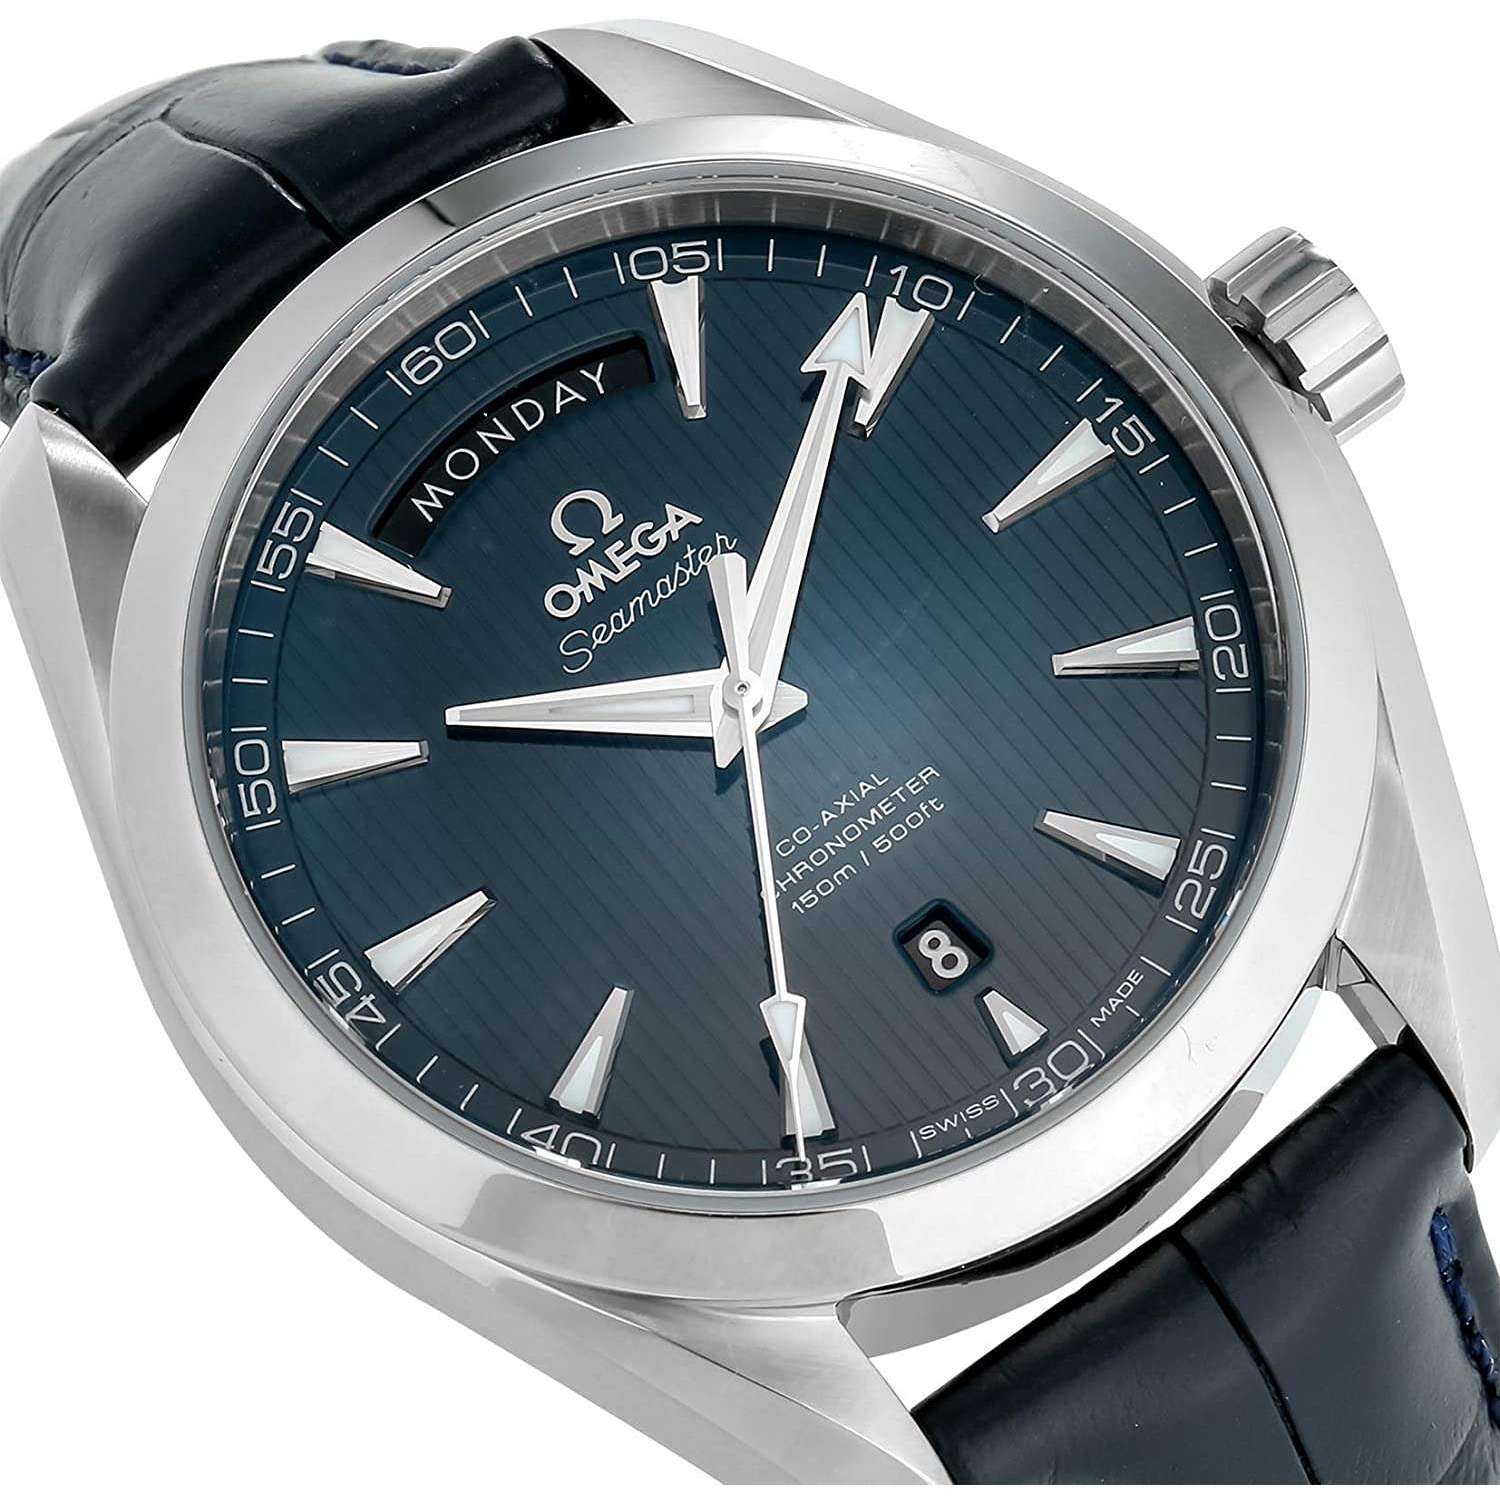 ROOK JAPAN:OMEGA SEAMASTER CO-AXIAL CHRONOMETER 41 MM MEN WATCH 231.13.42.22.03.001,Luxury Watch,Omega